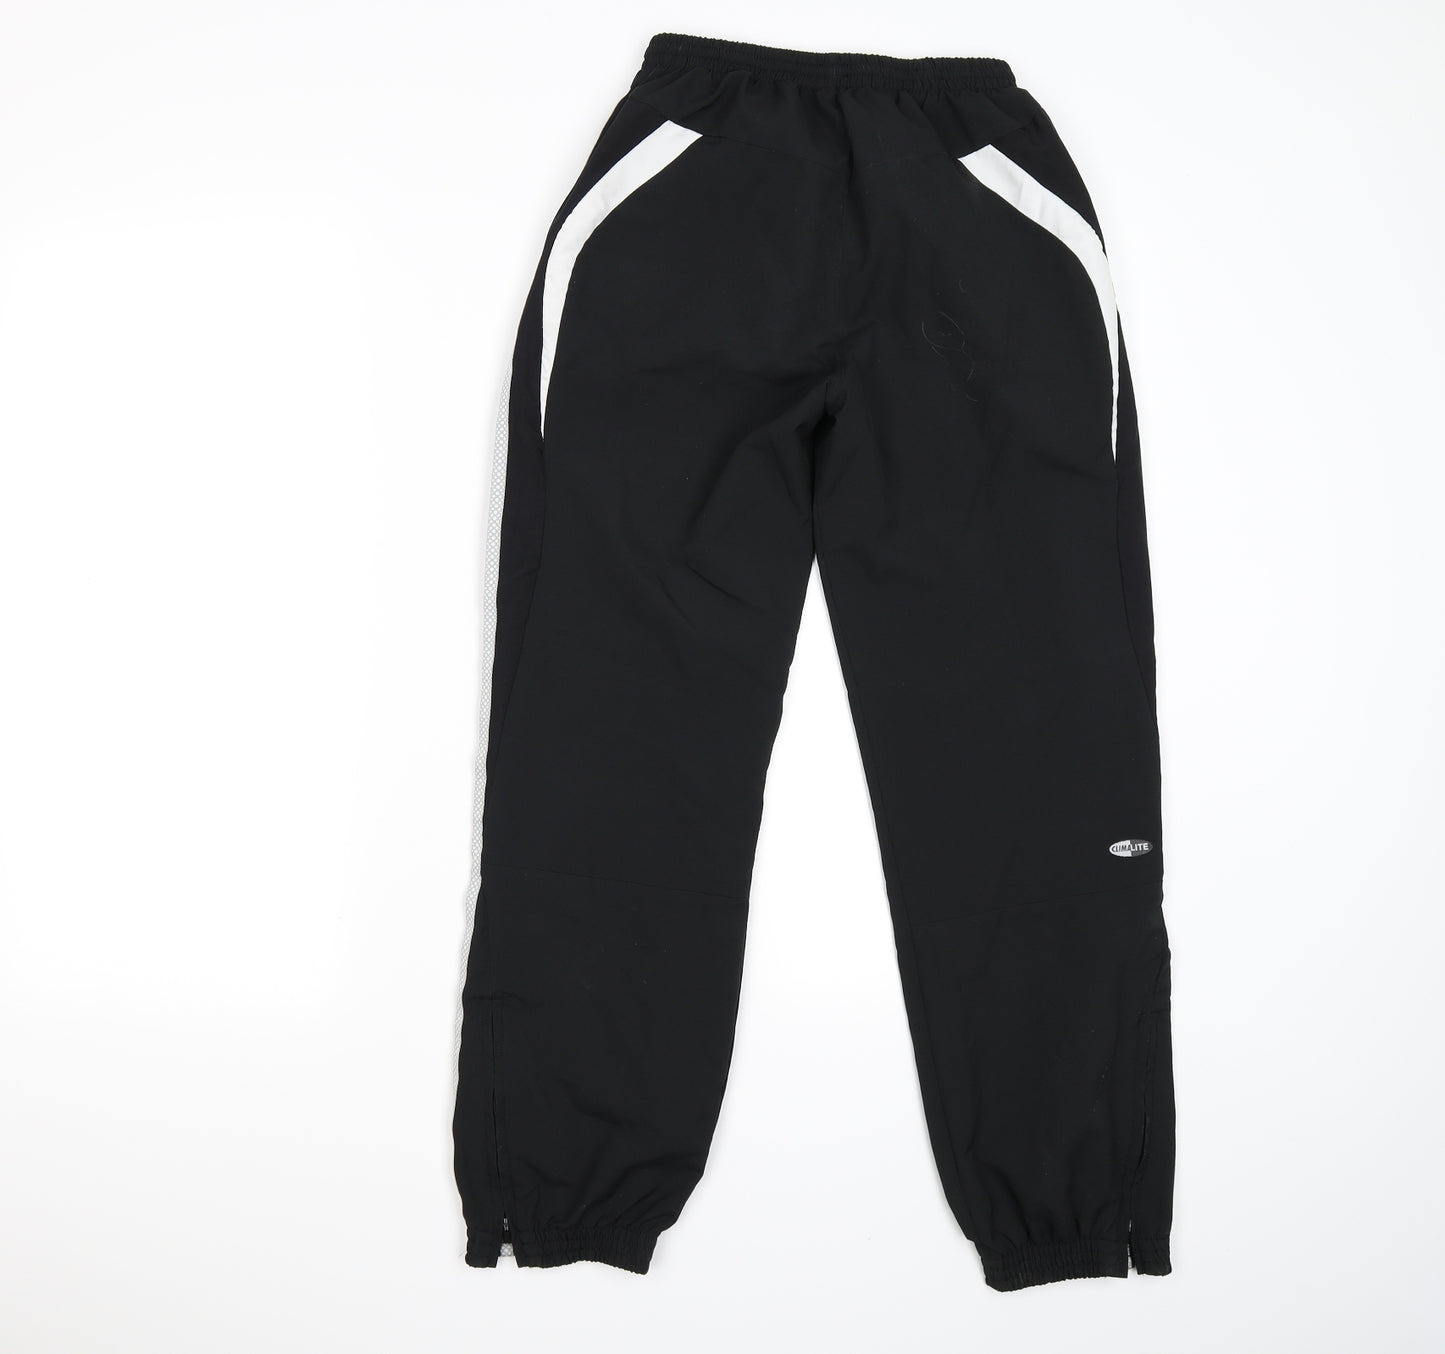 adidas Boys Black Striped  Jogger Trousers Size 11-12 Years